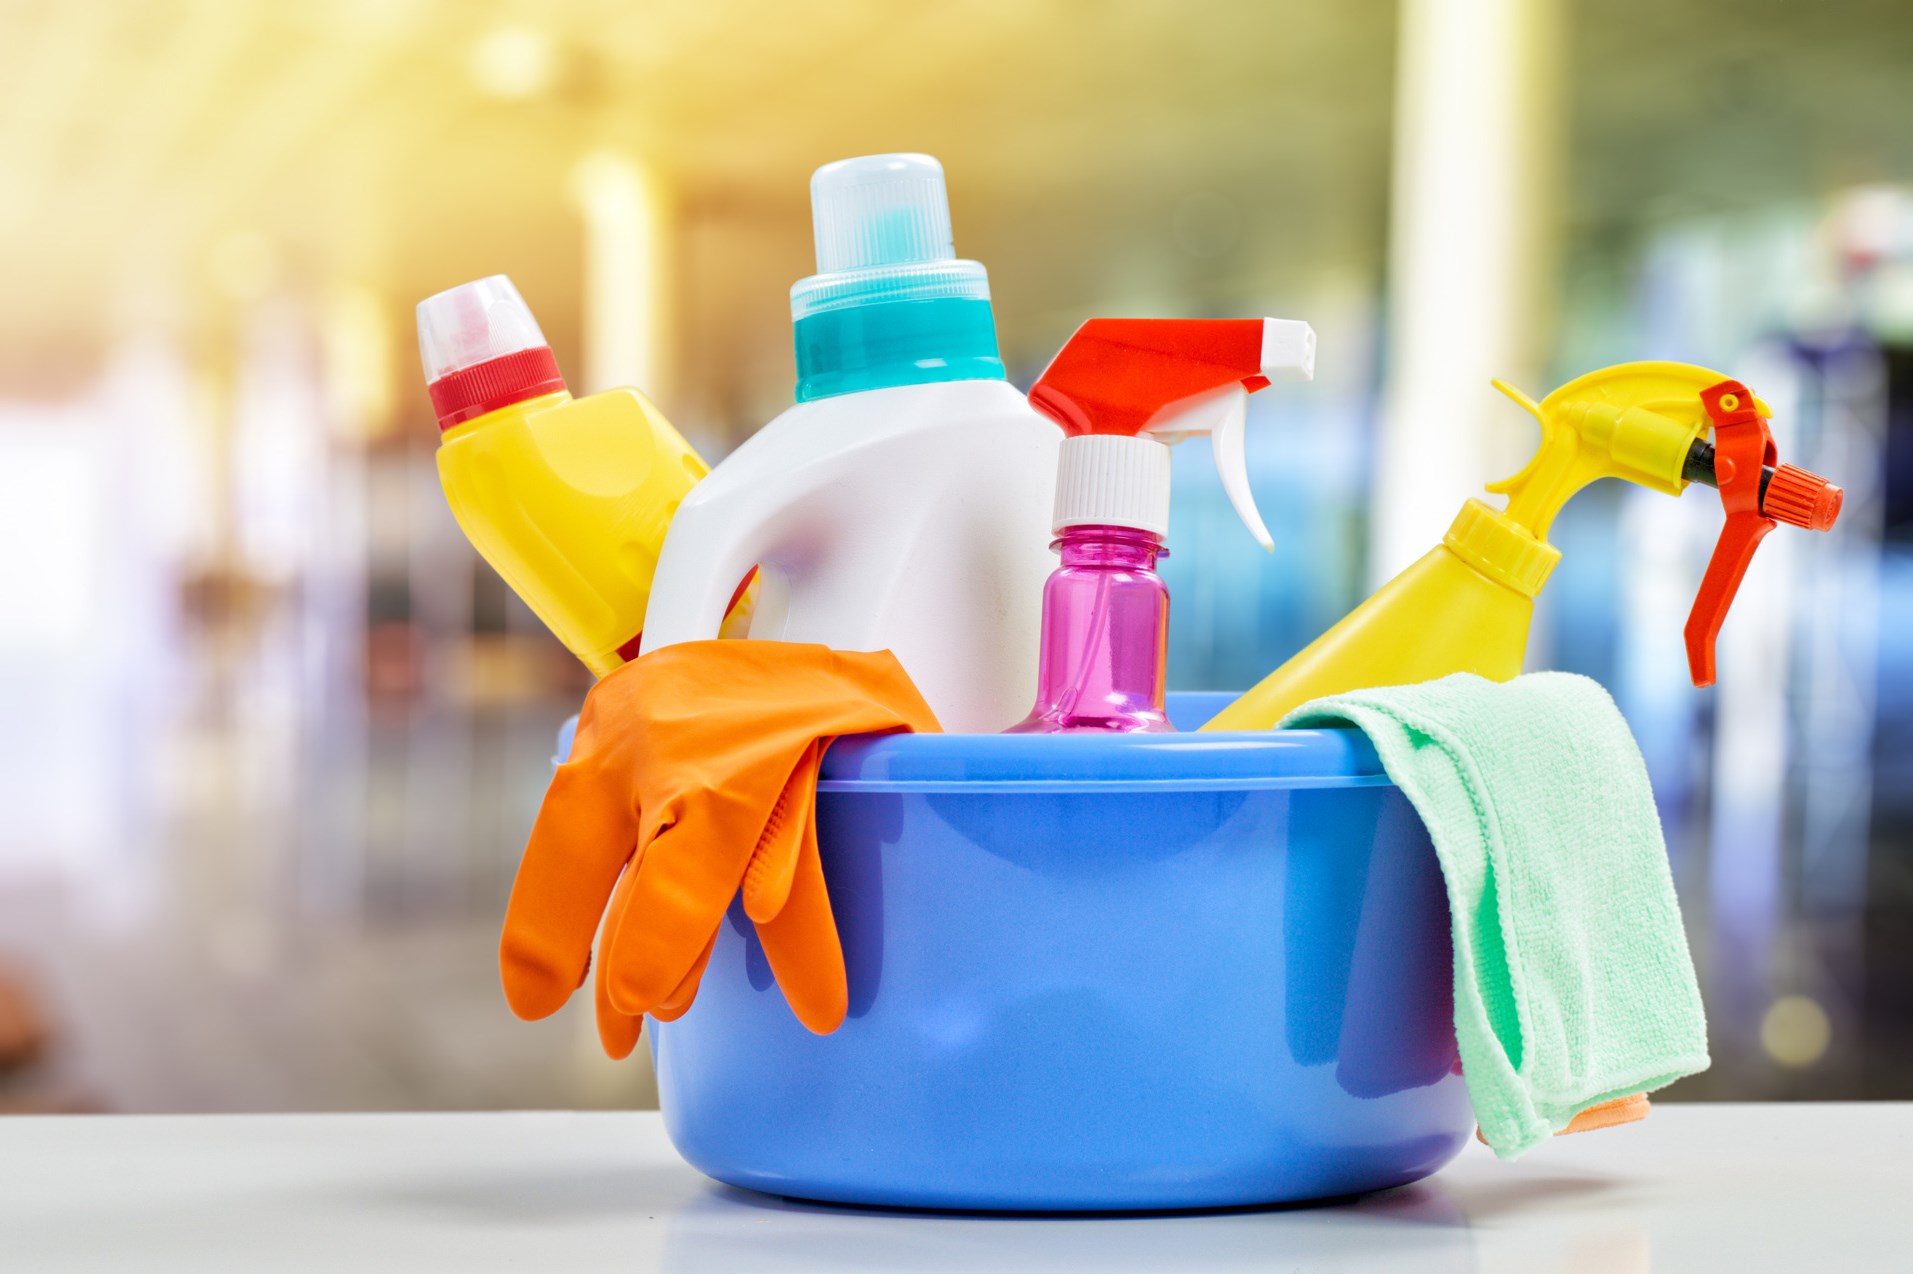 Preservatives and fragrances in cleaning agents